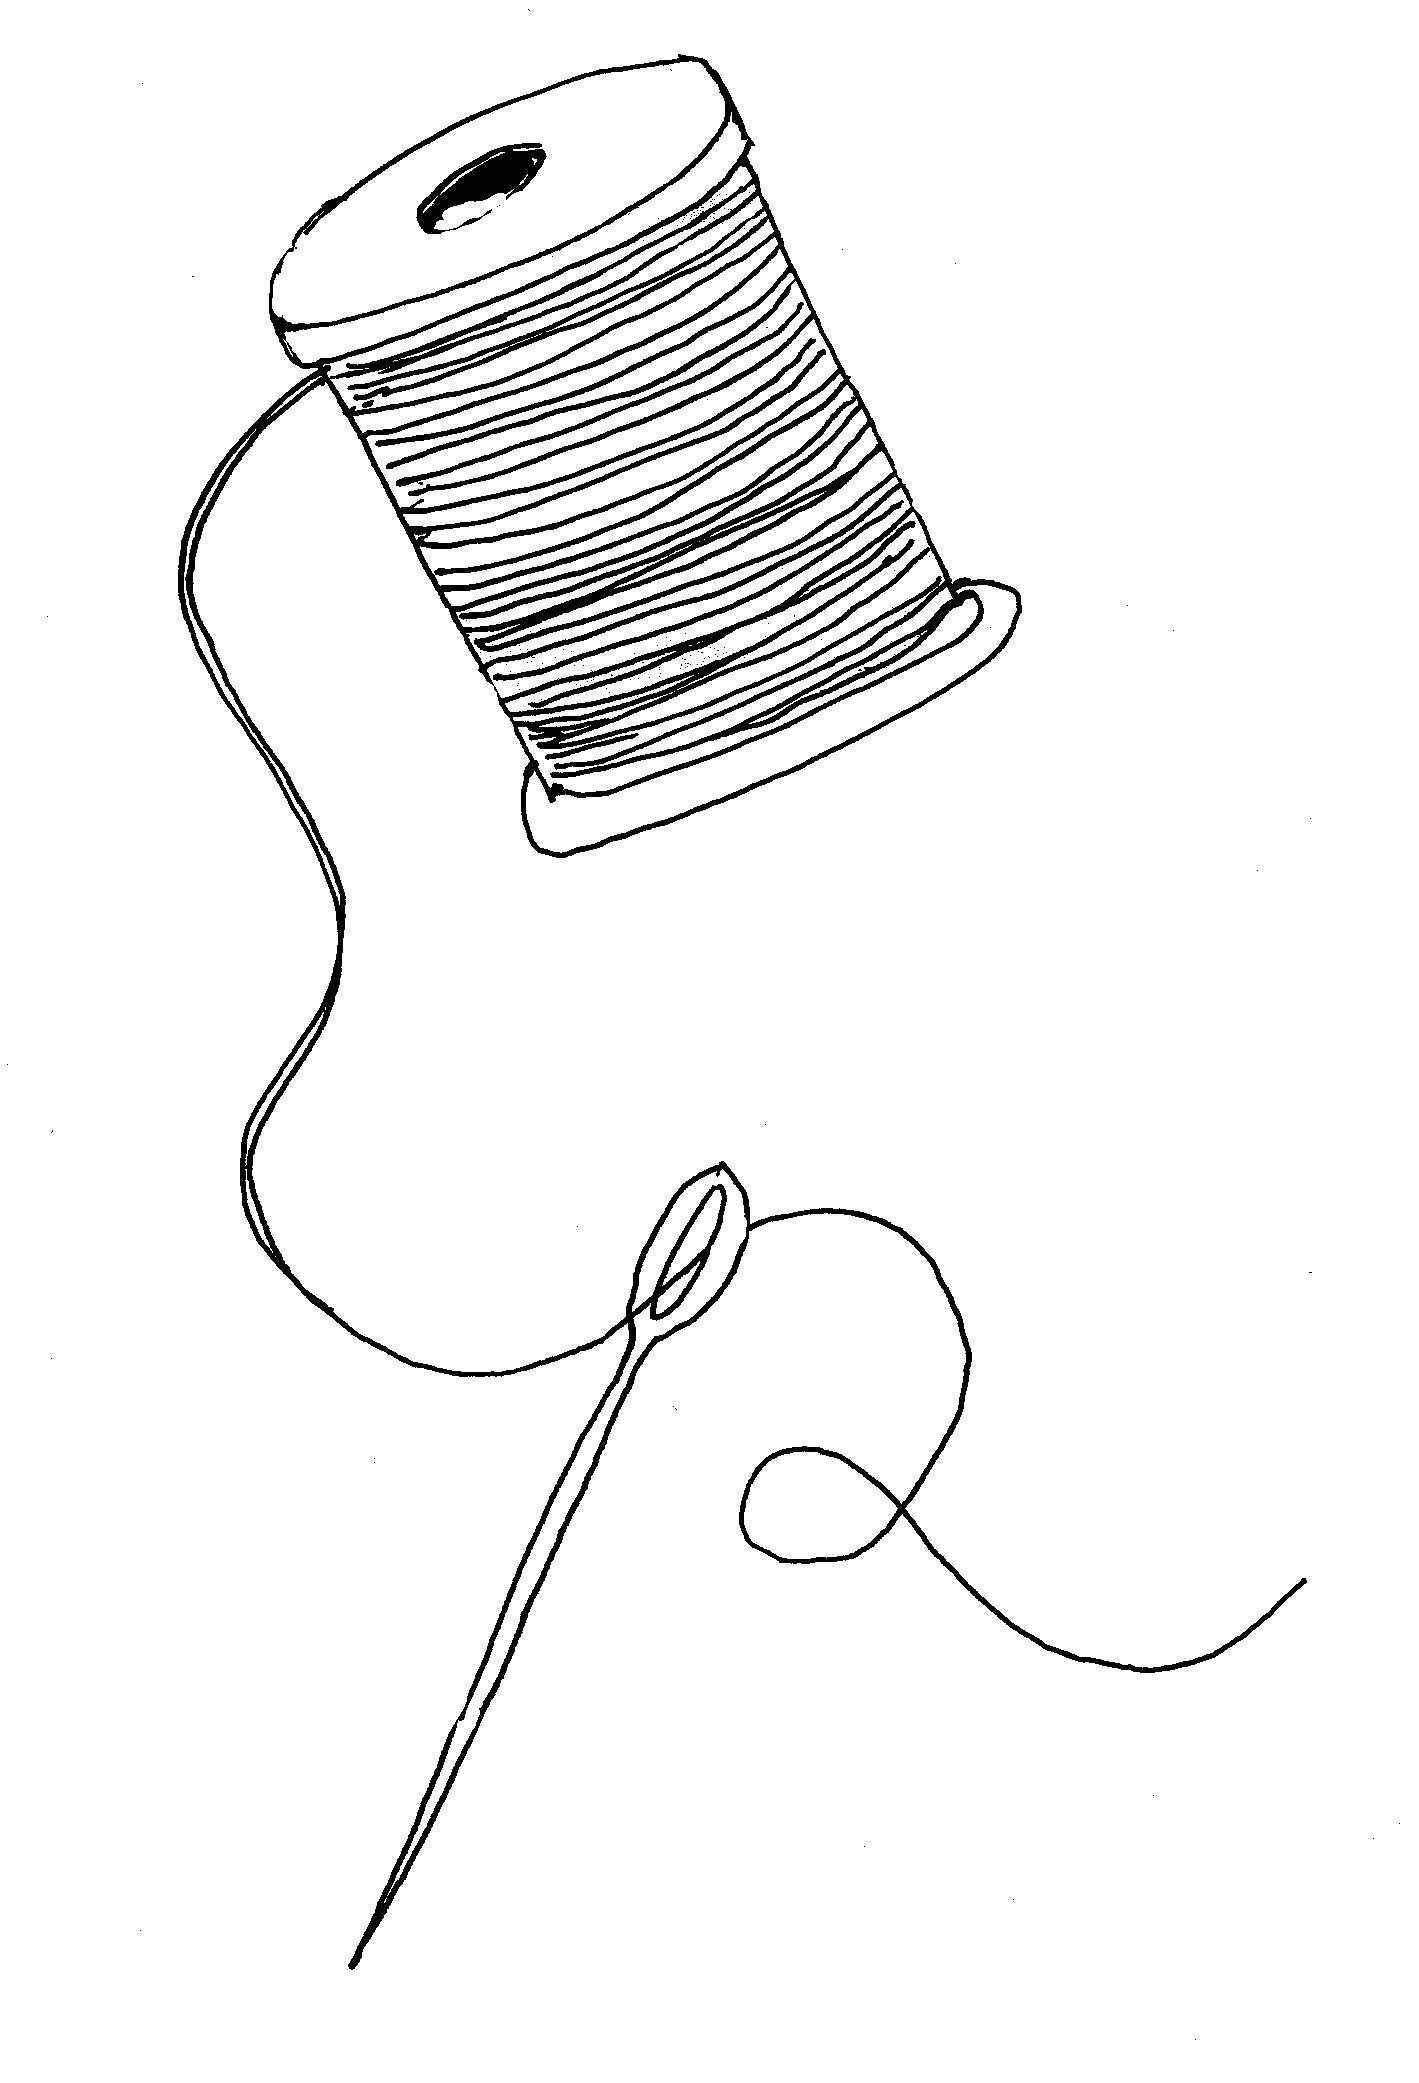 Sewing needle and thread clipart